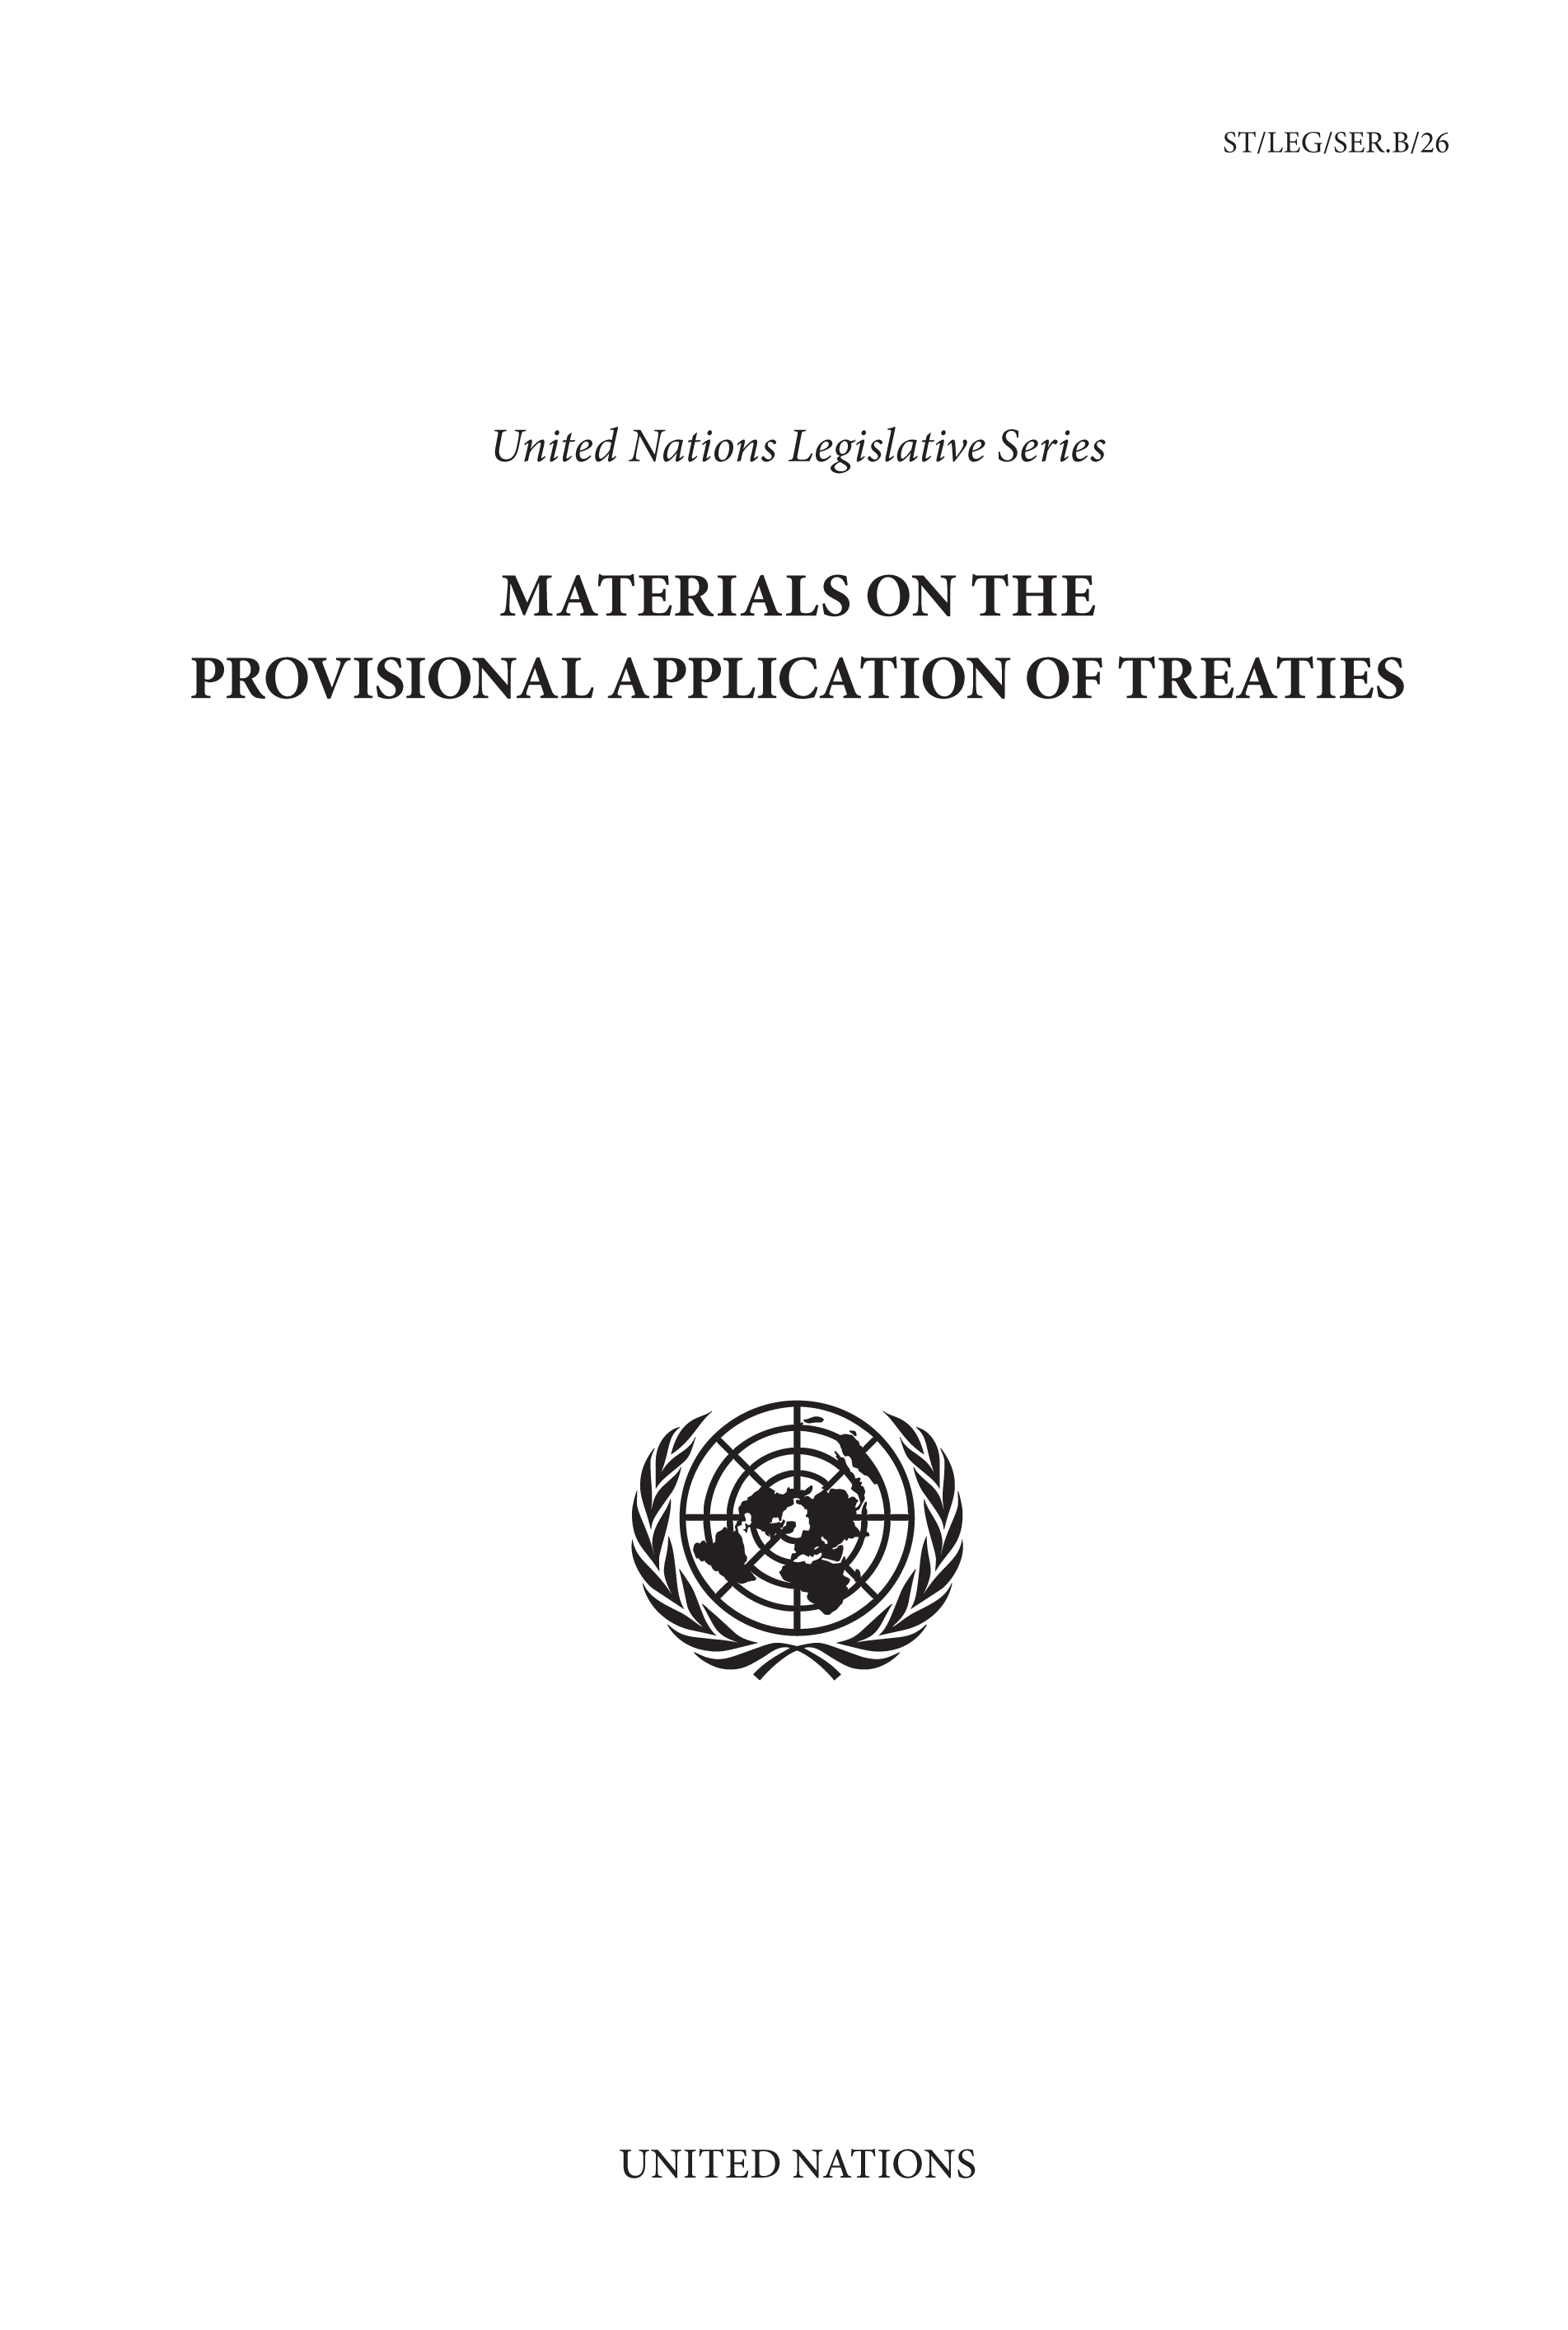 image of Materials on the Provisional Application of Treaties